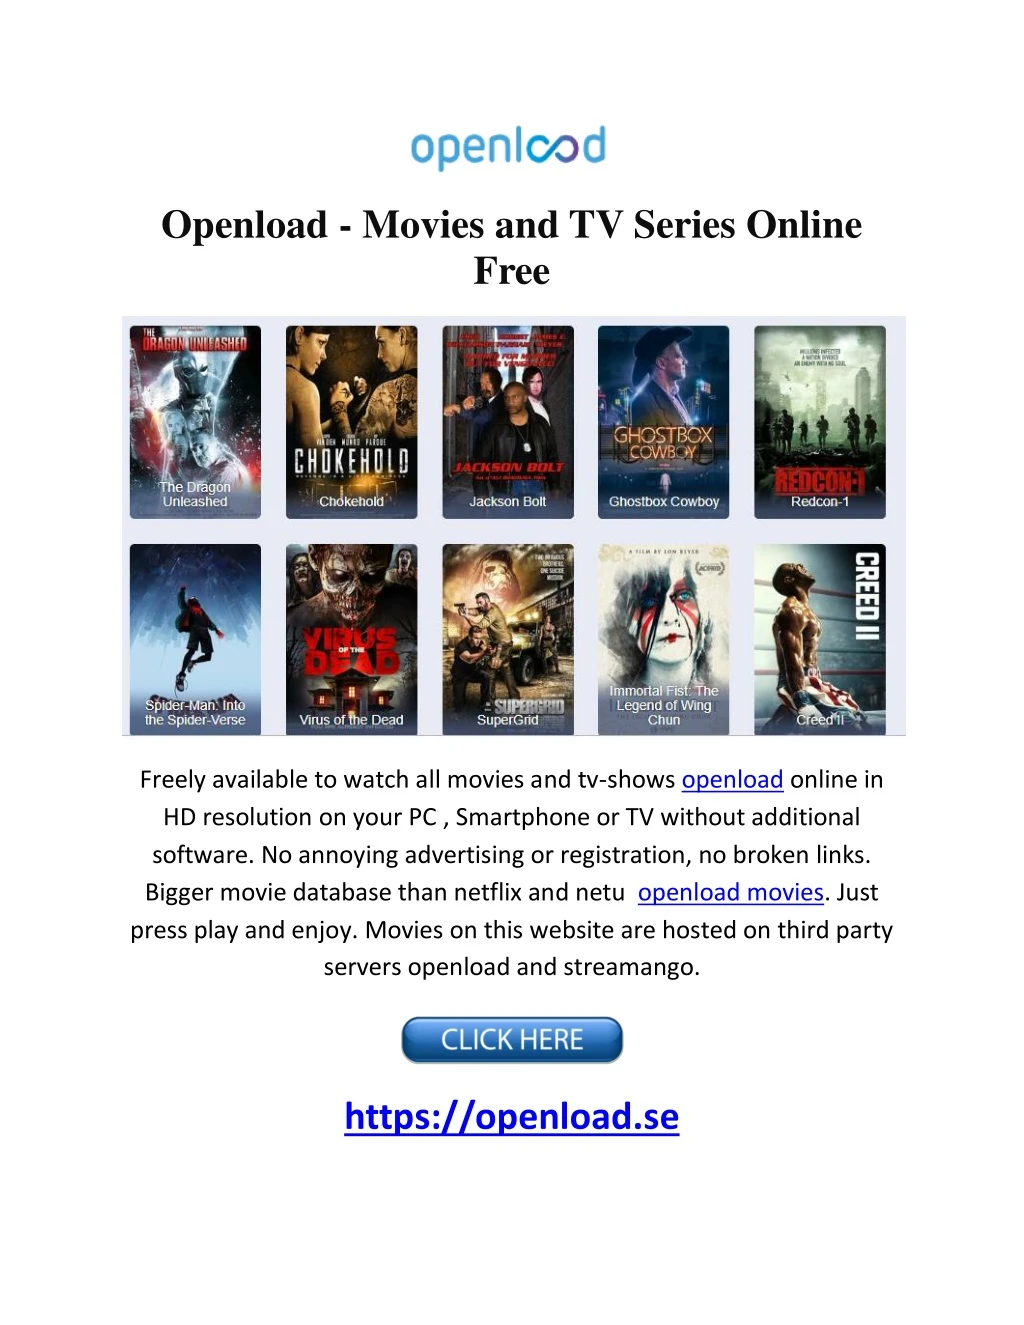 openload movies and tv series online free